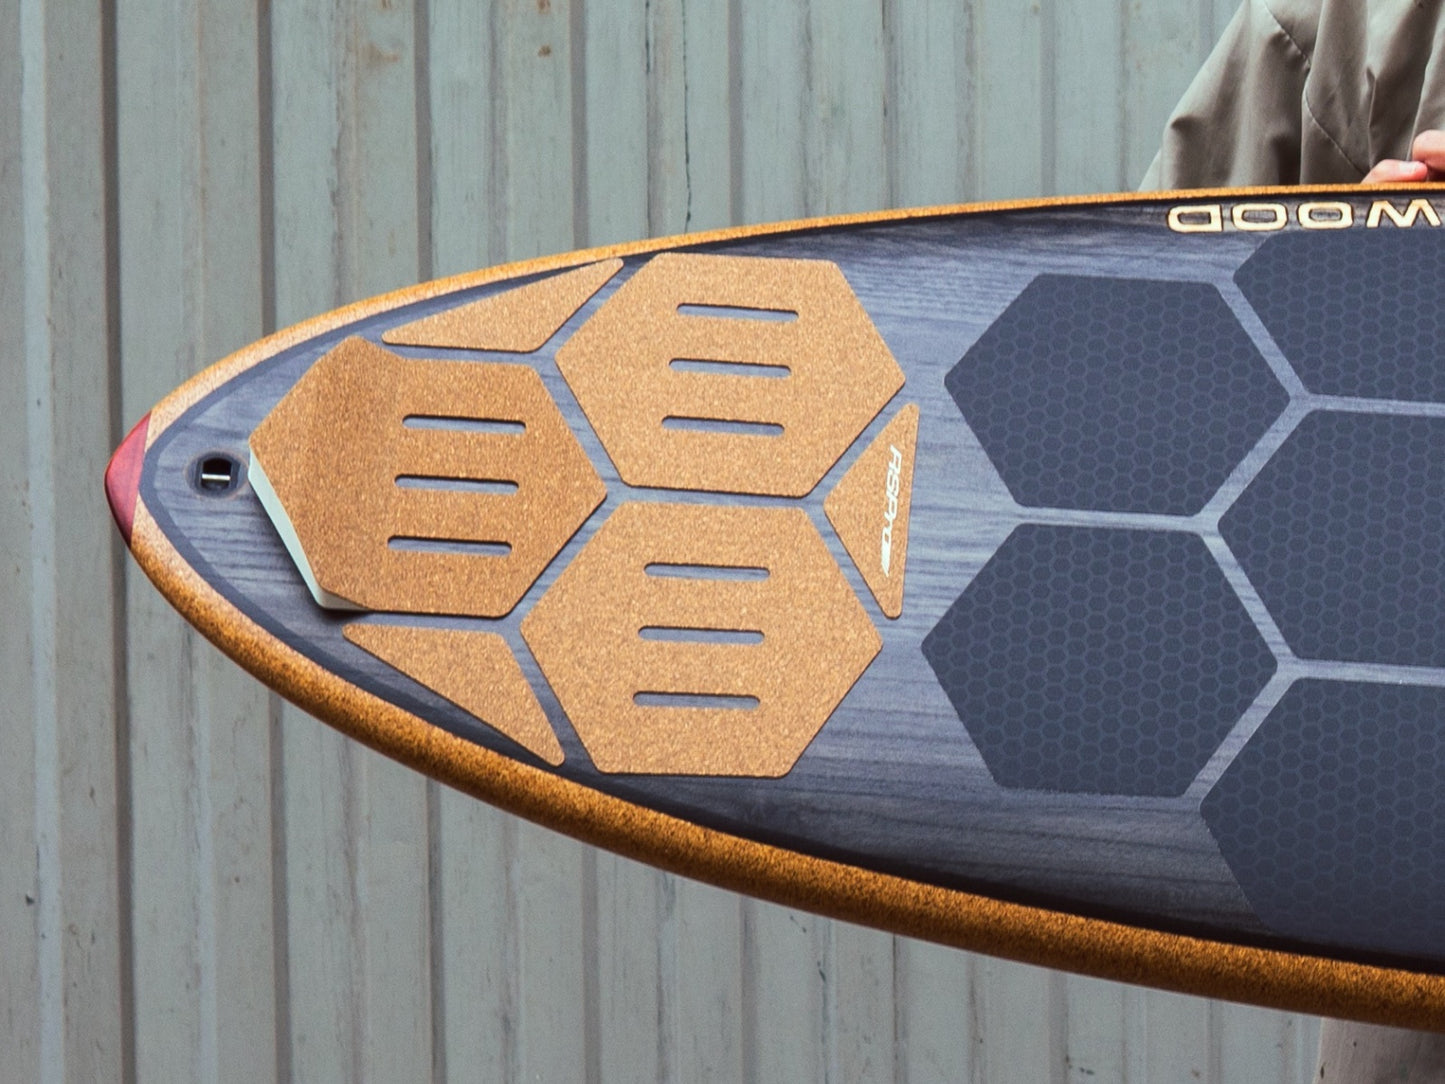 RSPro cork Hexa Tail pad on a wood surfboard